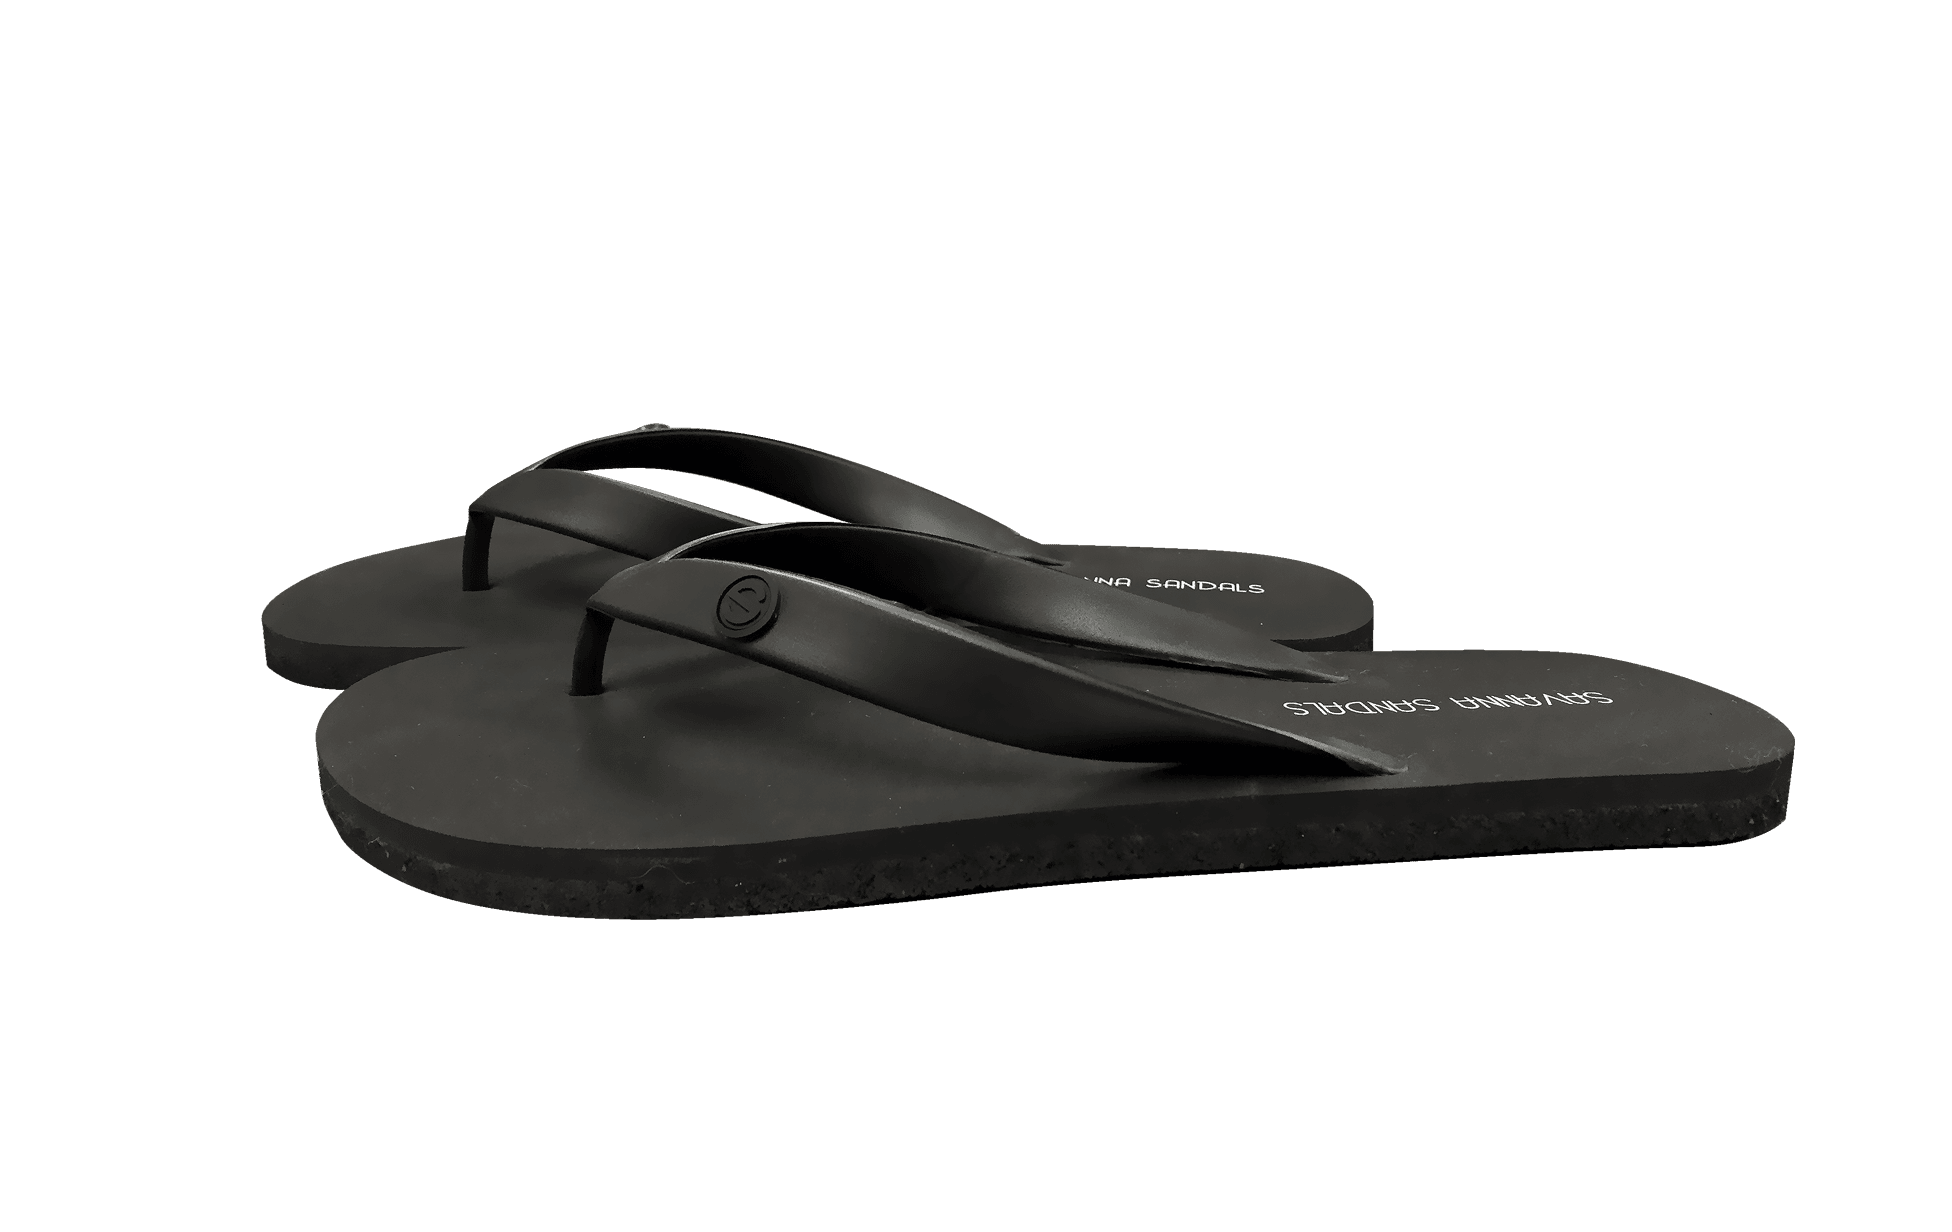 Men's Recycled Tire Rubber Flip Flops-Blackcategory_Mens Accessories from Savanna Sandals - SHOPELEOS